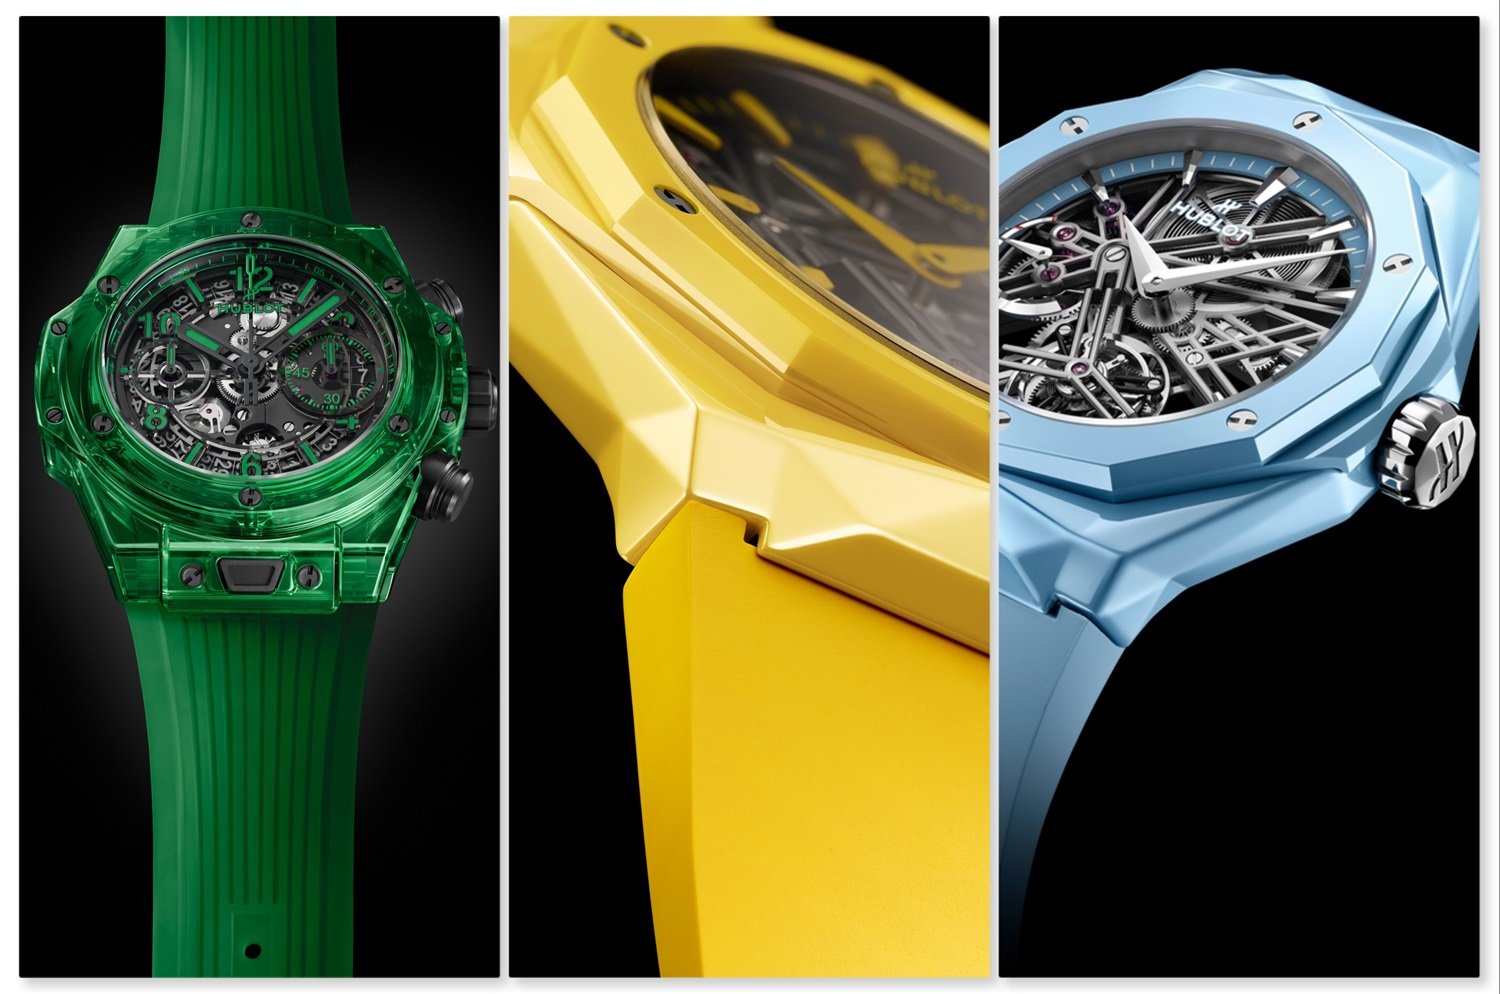 Introducing Three New Hublot Watches: The Big Bang Unico Green Saxem And Classic Fusion Orlinski Ceramic In Two Colors